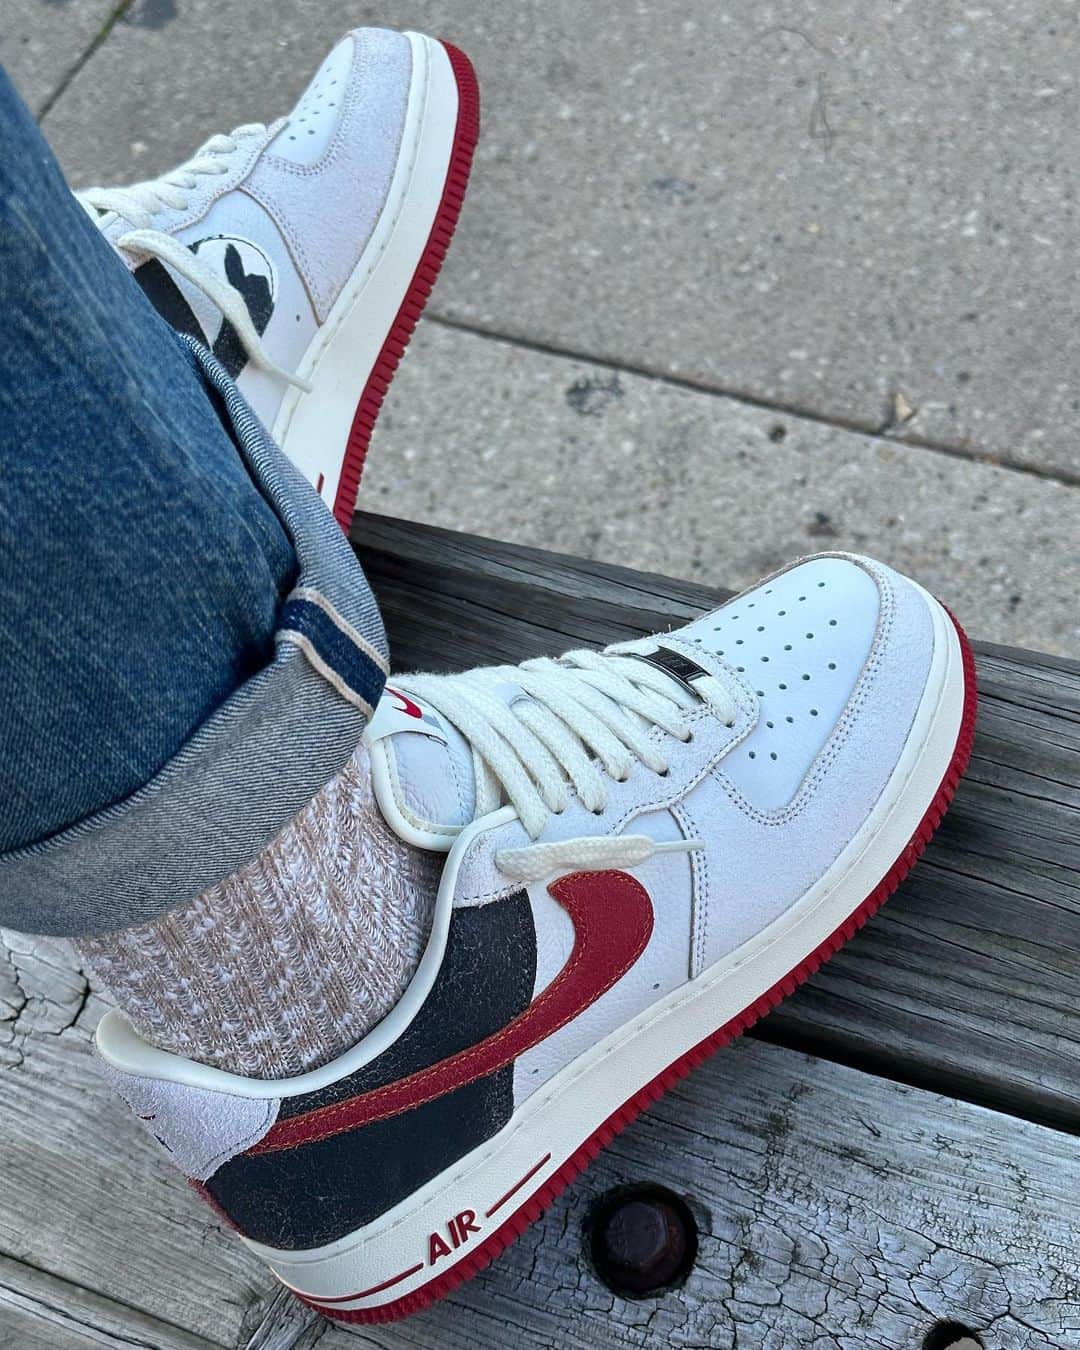 Mr. Tyのインスタグラム：「#todaykicks Nike AF1 low “Dear Chicago”. No corners cut on the materials on this shoe. They’re definitely built to withstand the elements in Chicago- impeccable. Some parts rub off to represent the charred rubble from the great Chicago fire, while the cow print symbolizes the cow that is said to have tipped over the lantern, leading to the fire. Available 10/20 in Chicago!  #ijustlikeshoes #af1 #wdywt #airforceone #af1gallery #teamaf1 #af1always #wiw #airforce1cartel #chicago #complexkicks #nikebyyou」